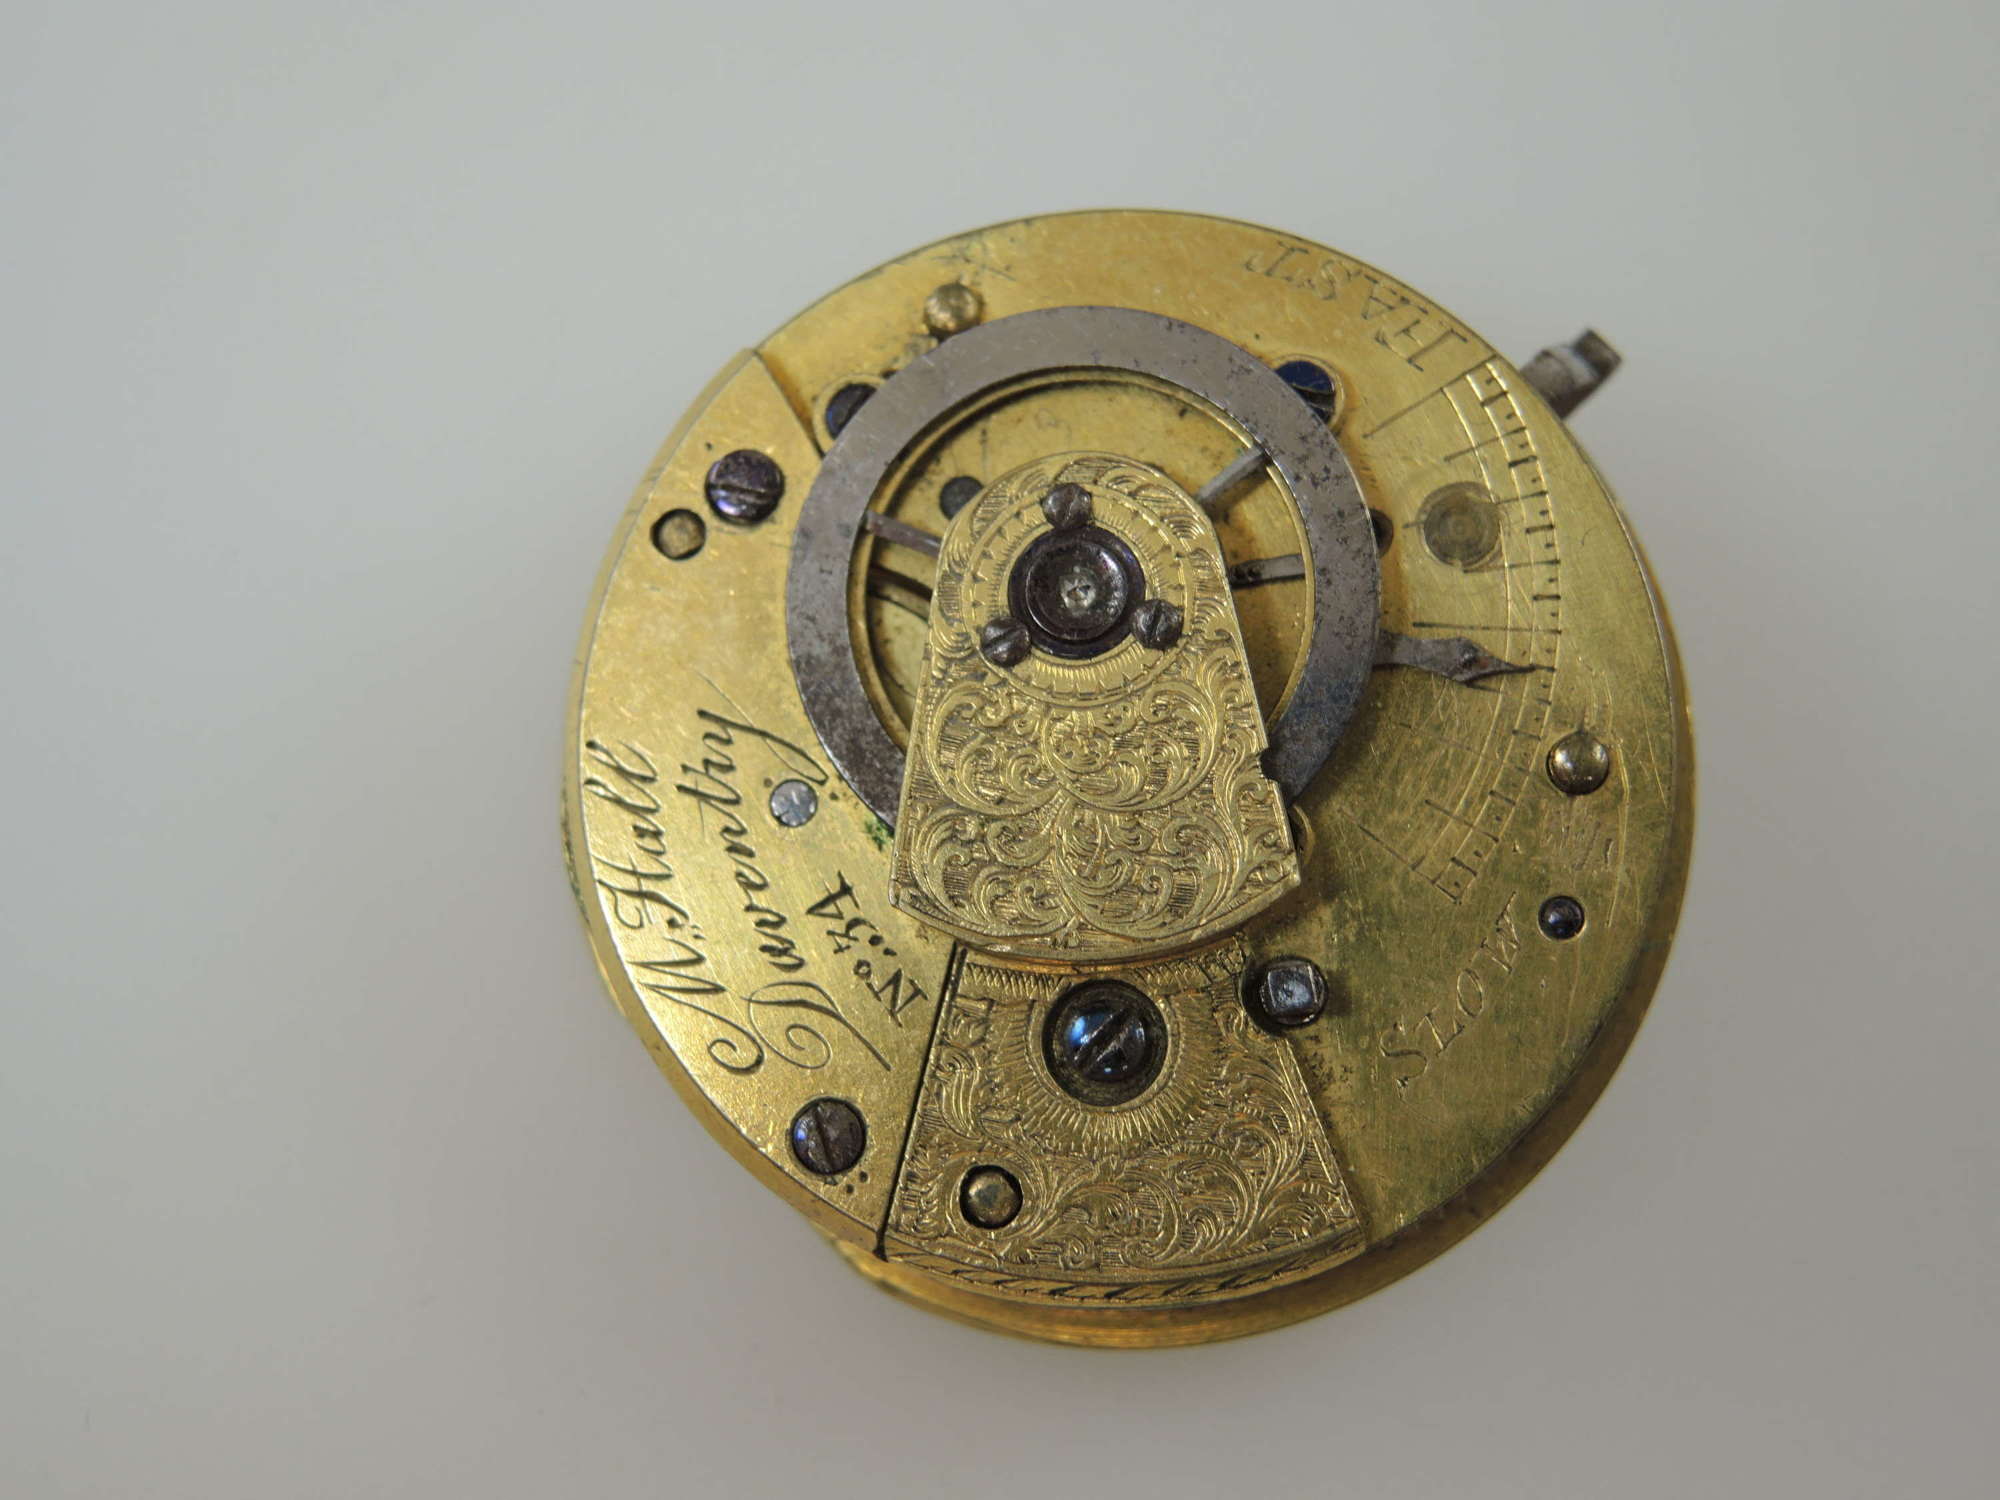 Verge pocket watch movement by Hall, Daventry c1825